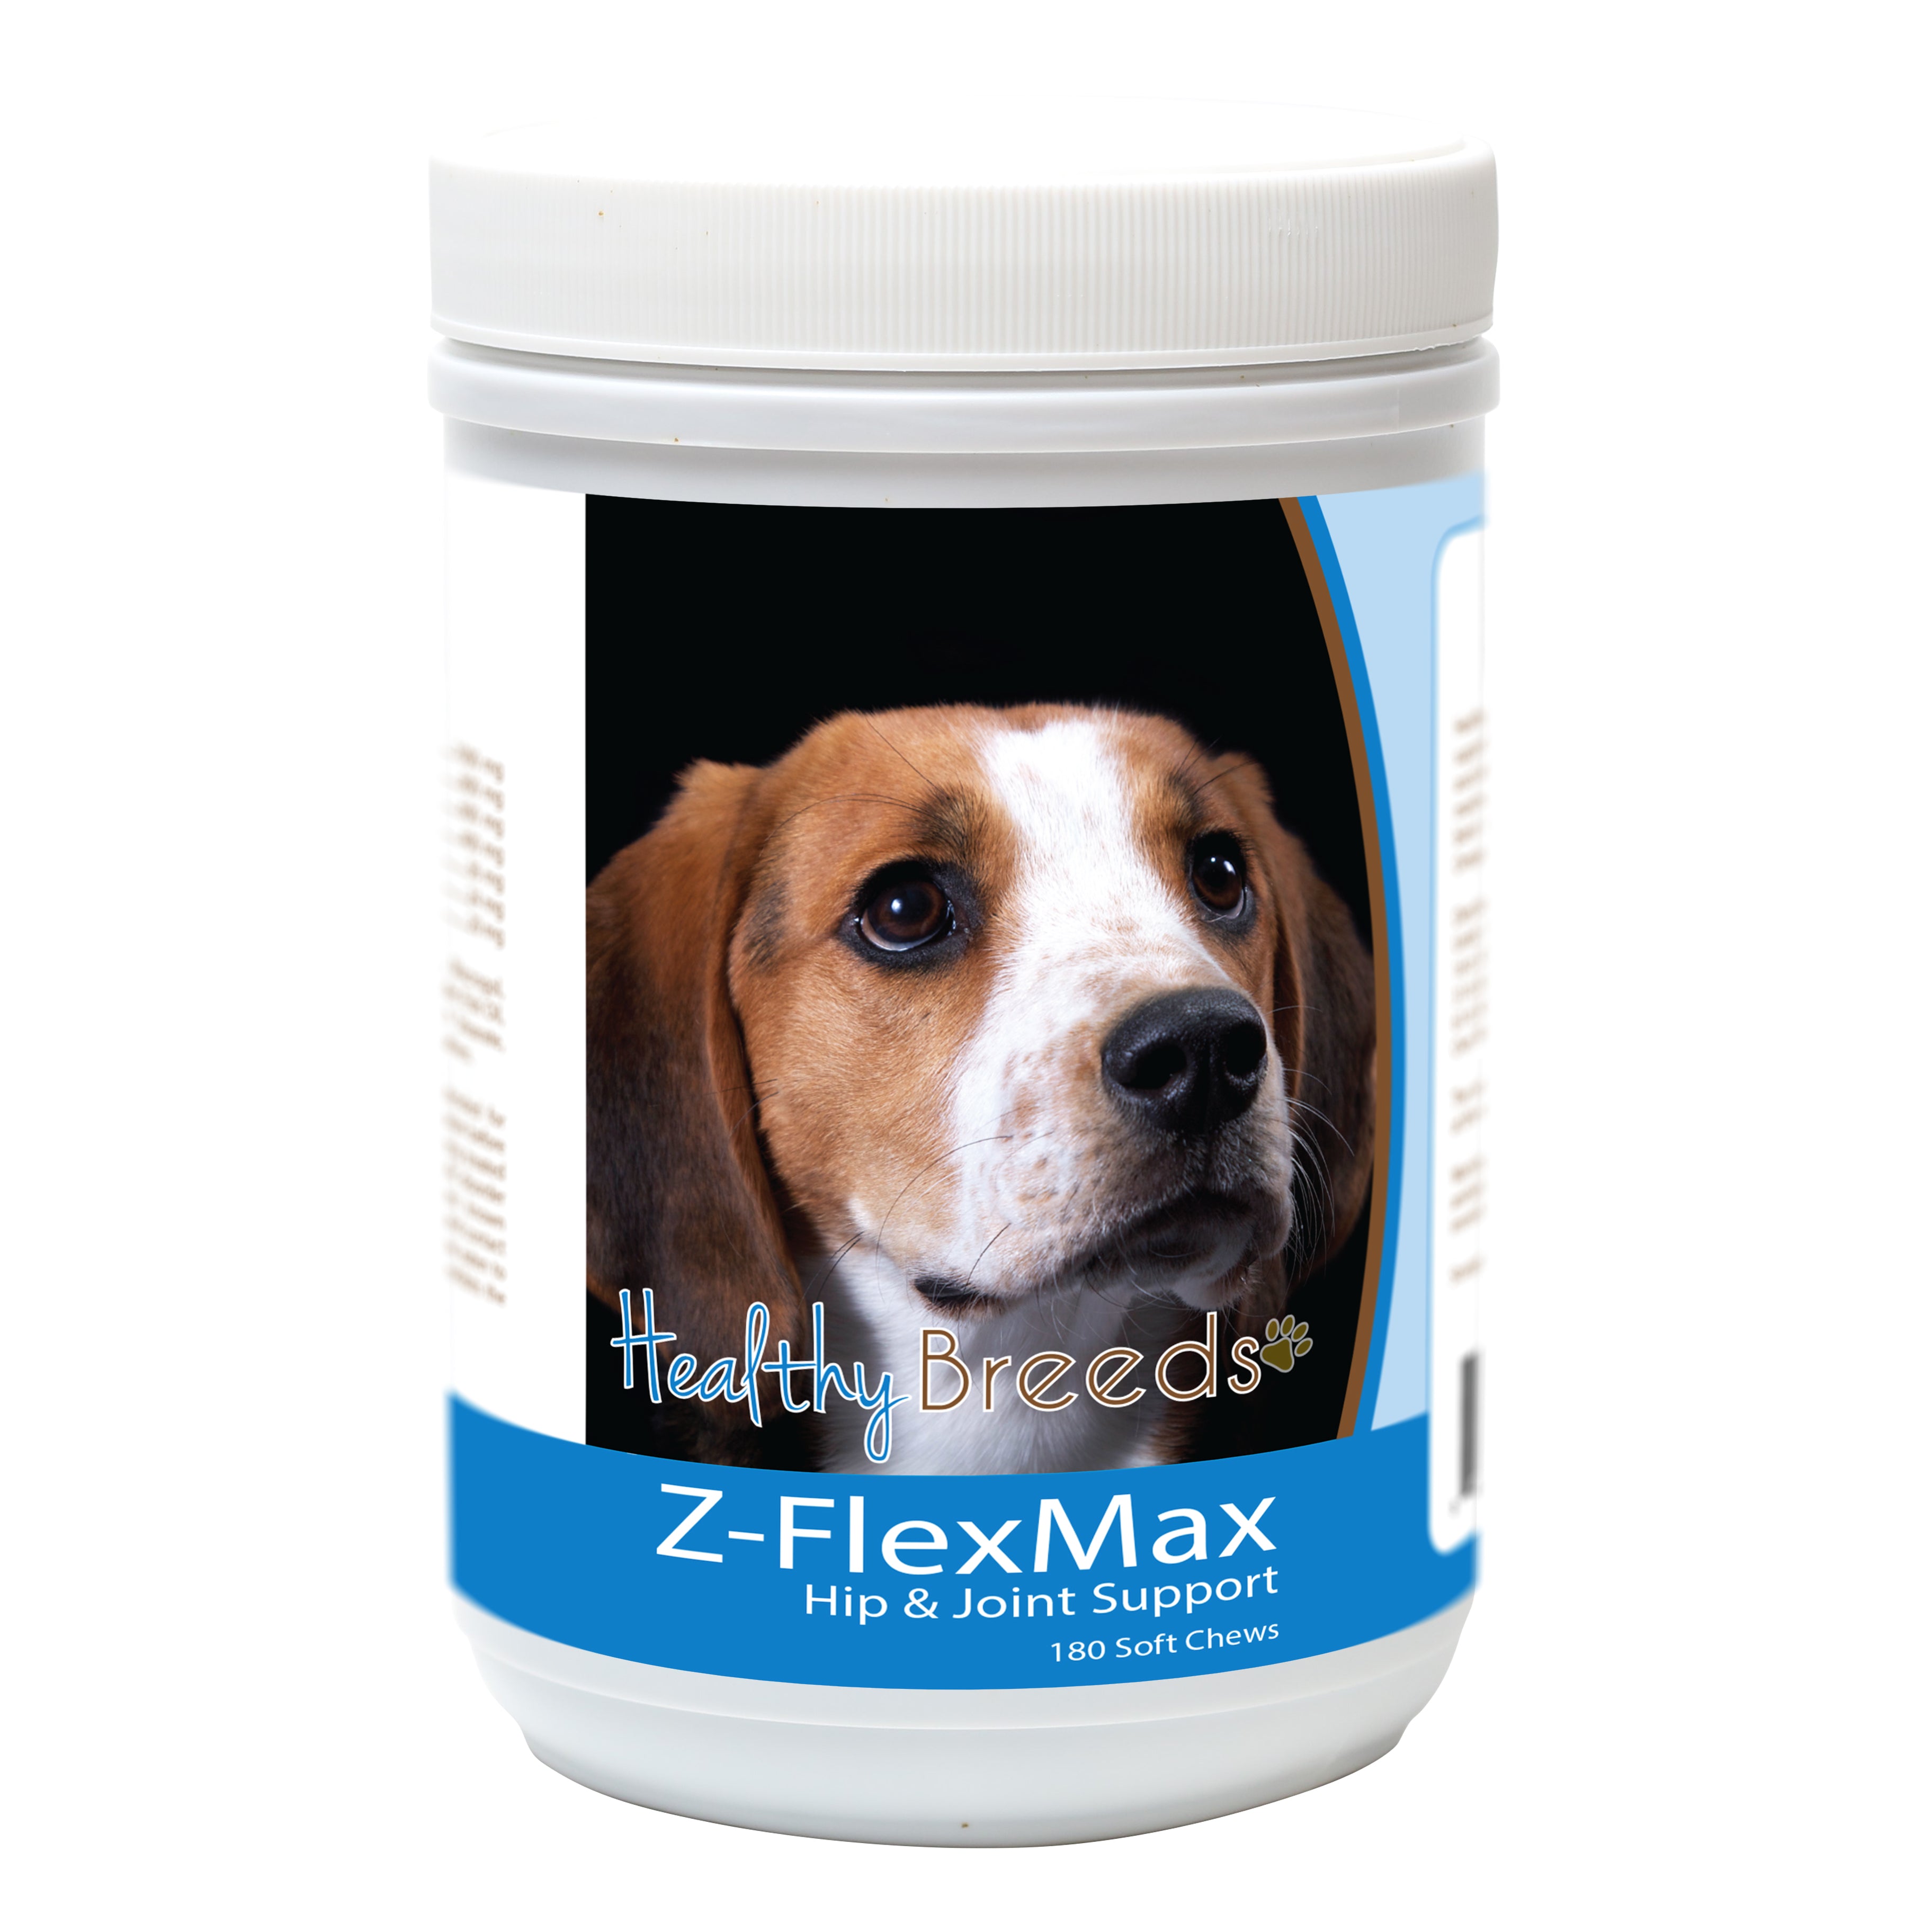 American English Coonhound Z-Flex Max Dog Hip and Joint Support 180 Count